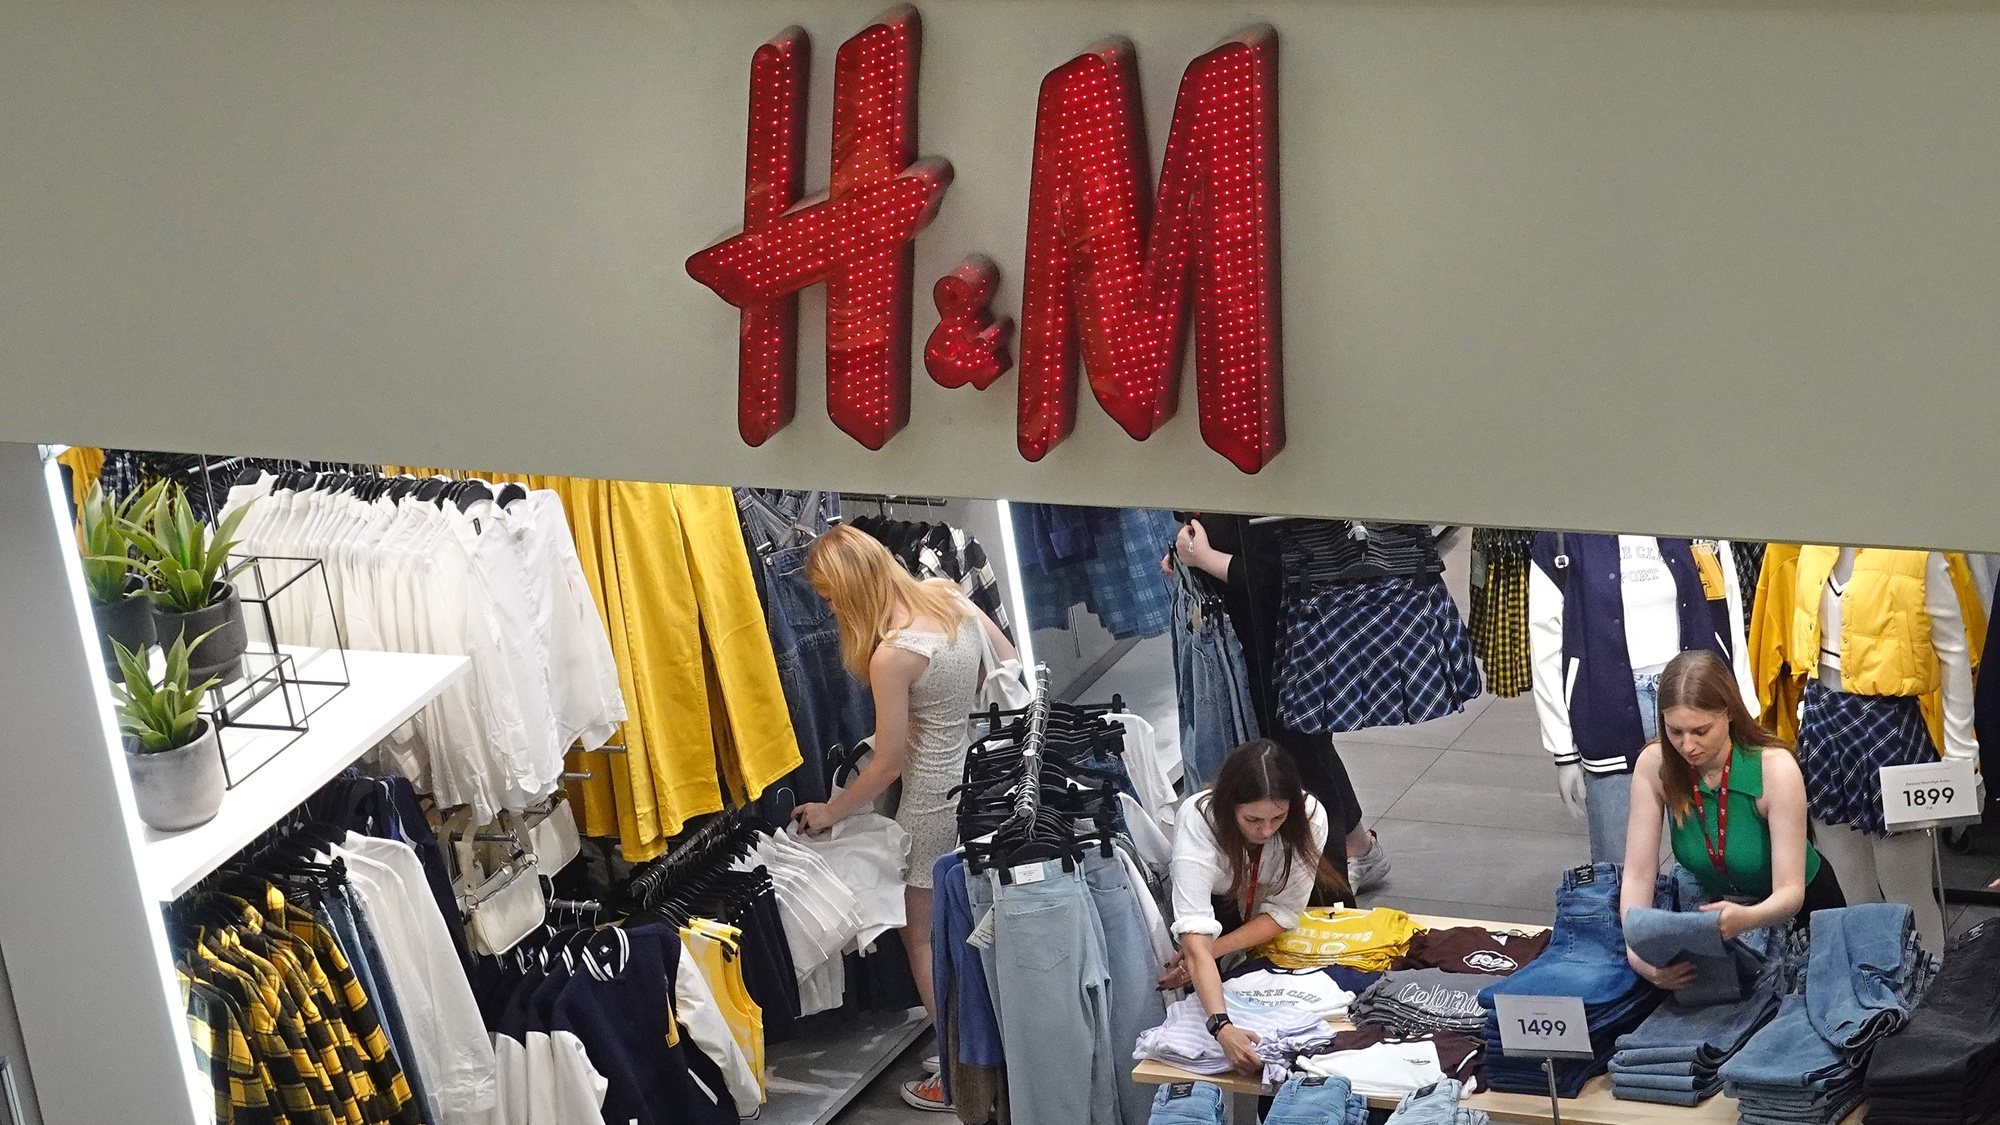 epa10104115 A logo of H&amp;M Group (Hennes &amp; Mauritz AB) multinational clothing company is seen on a store in the Metropolis shopping mall in Moscow, Russia, 03 August 2022. H&amp;M Group (H &amp; M Hennes &amp; Mauritz AB) multinational clothing company announced in July 2022 of its decision to wind down its business in Russia due to &#039;current operational challenges and an unpredictable future&#039;. As part of this process the company reopens its physical stores for selling remaining stock in Russia. Earlier, in March 2022 the company paused all sales in Russia, being among some other brands which announced the suspension or limitation of their business in Russia as the result of sanctions imposed by the West on Russia in response to what the Russian President declared as a &#039;Special Military Operation&#039; in Ukraine. Russian troops entered Ukraine on 24 February 2022, prompting a series of severe economic sanctions imposed by Western countries on Russia.  EPA/MAXIM SHIPENKOV